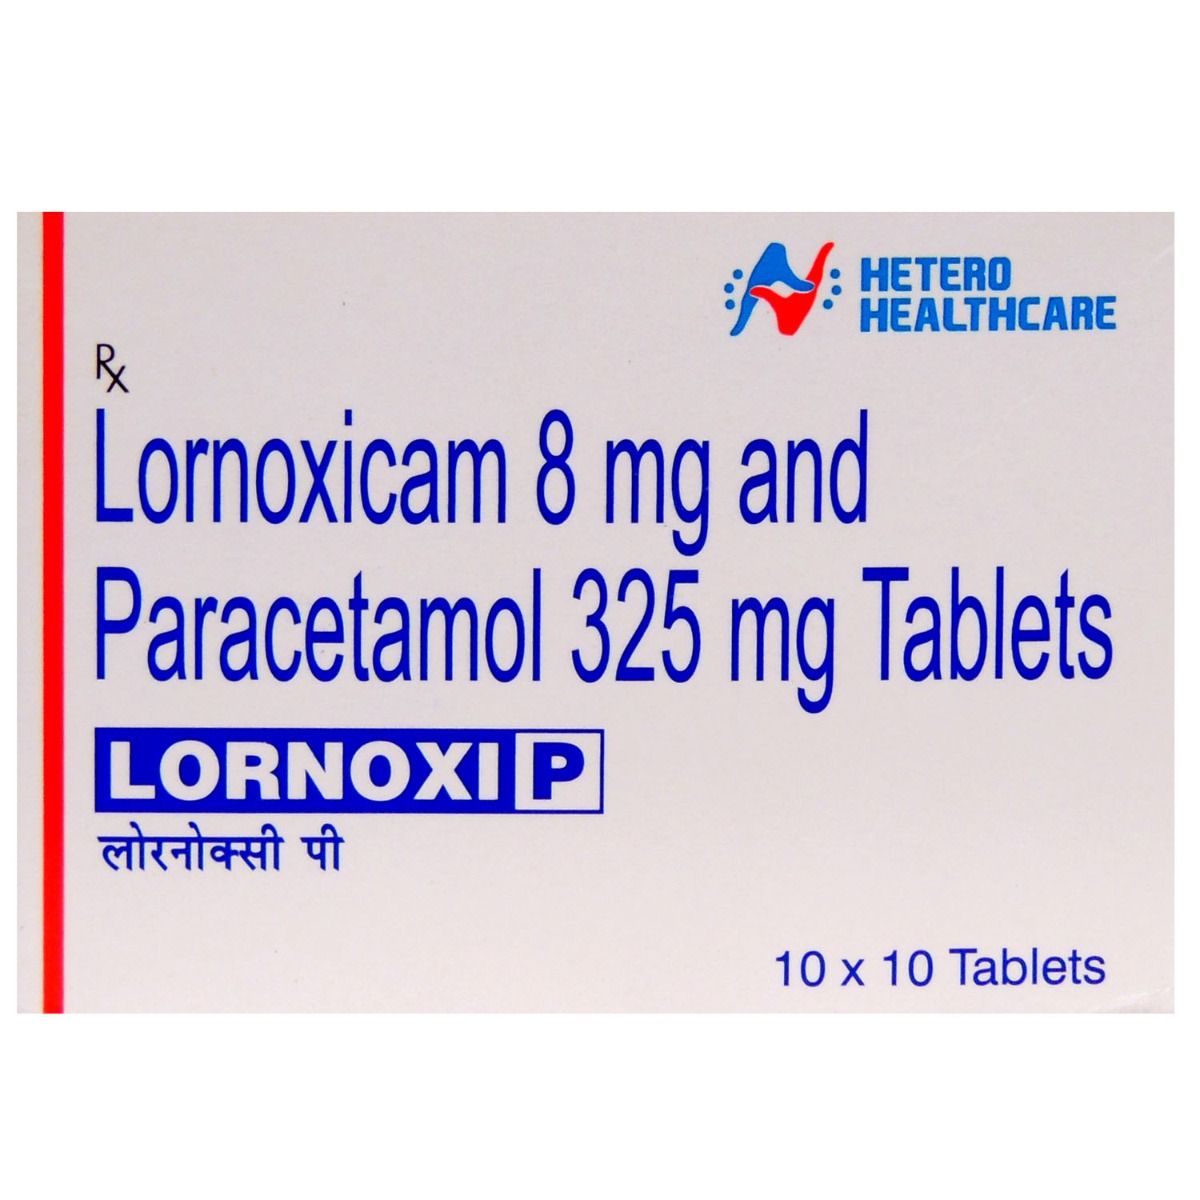 LORNOXI P TABLET Price, Uses, Side Effects, Composition - Apollo ...